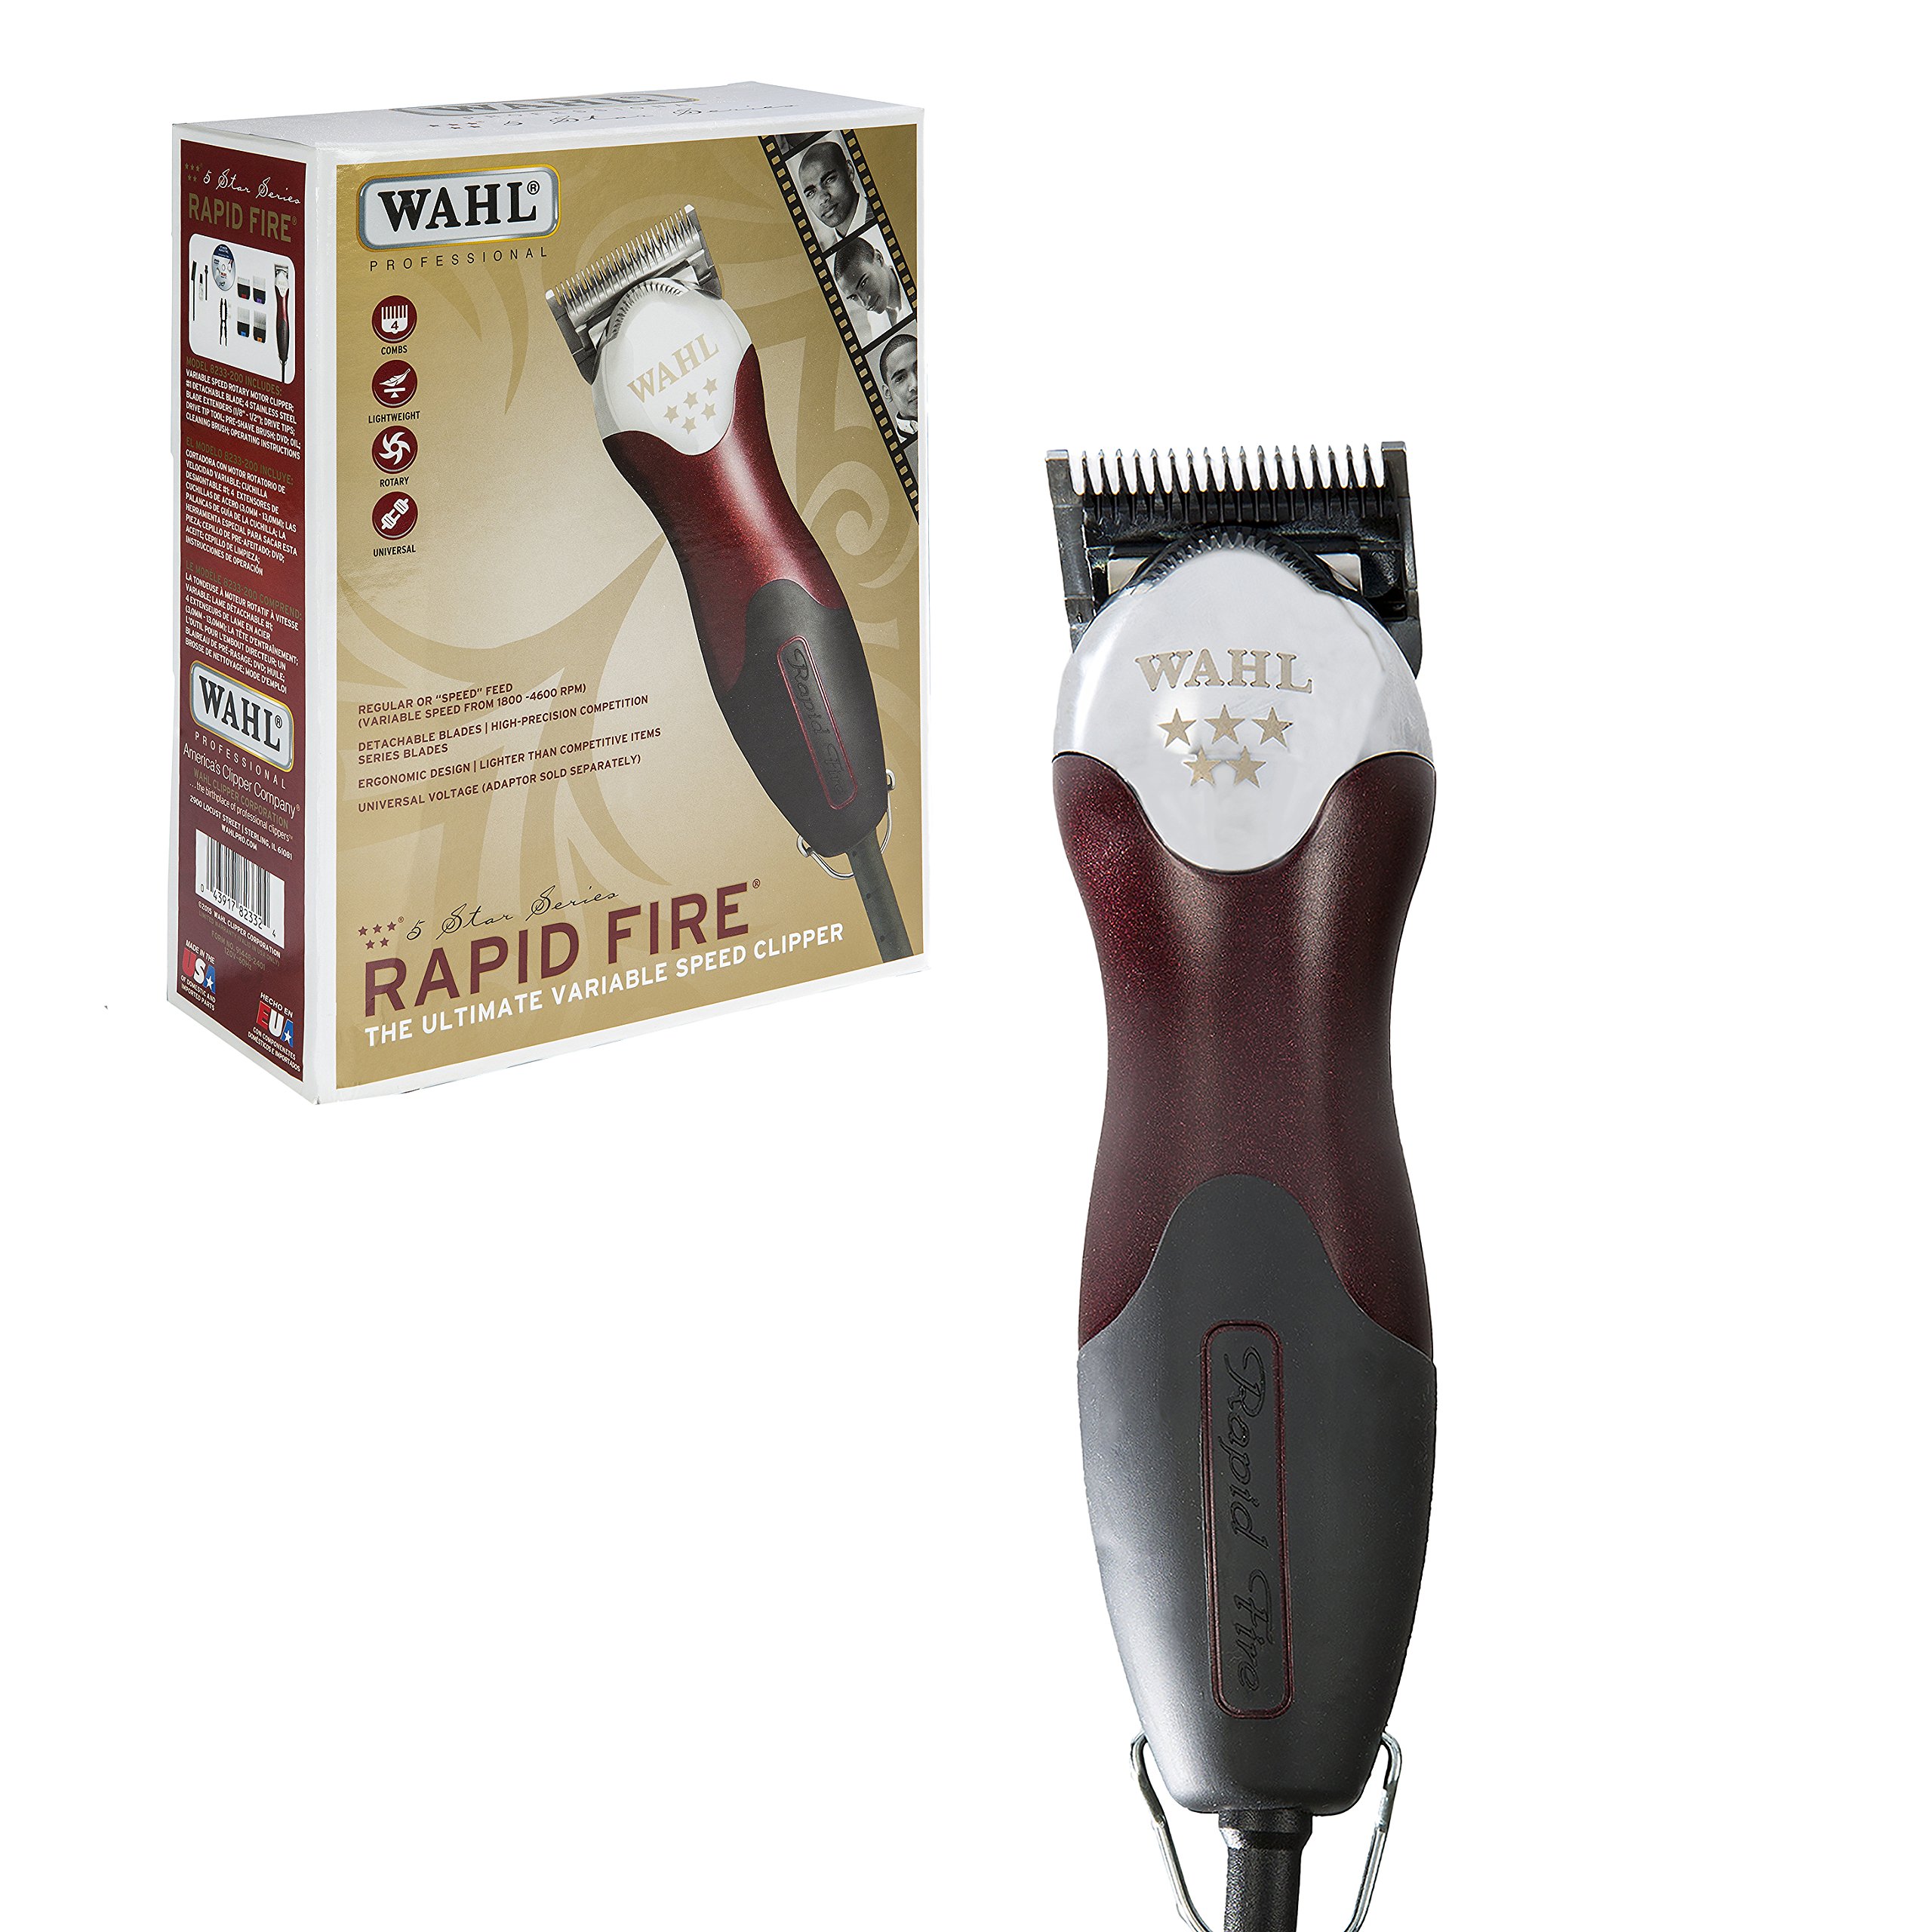 Wahl Professional 5 Star Rapid Fire Clipper for High Precision Cutting with 4 Steel Blade Extenders for Professional Barbers and Stylists – Model 8233-200